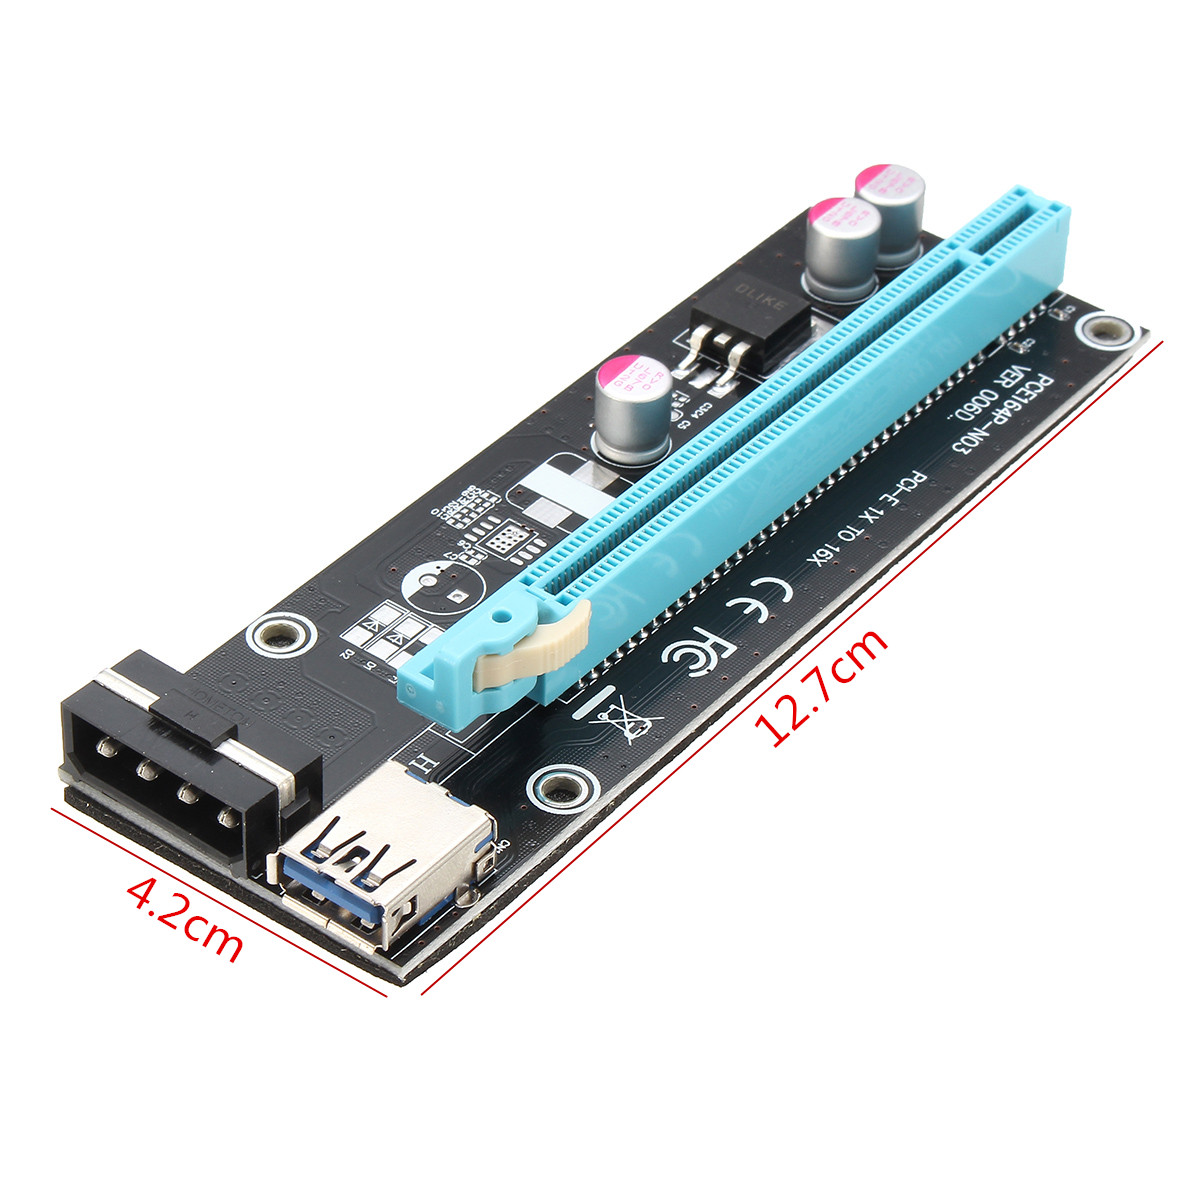 PCIE-Mining-Cable-1X-to-16X-Graphics-Card-Extension-Cable-PCI-E-Anti-burn-Design-USB30-External-Grap-1250533-7